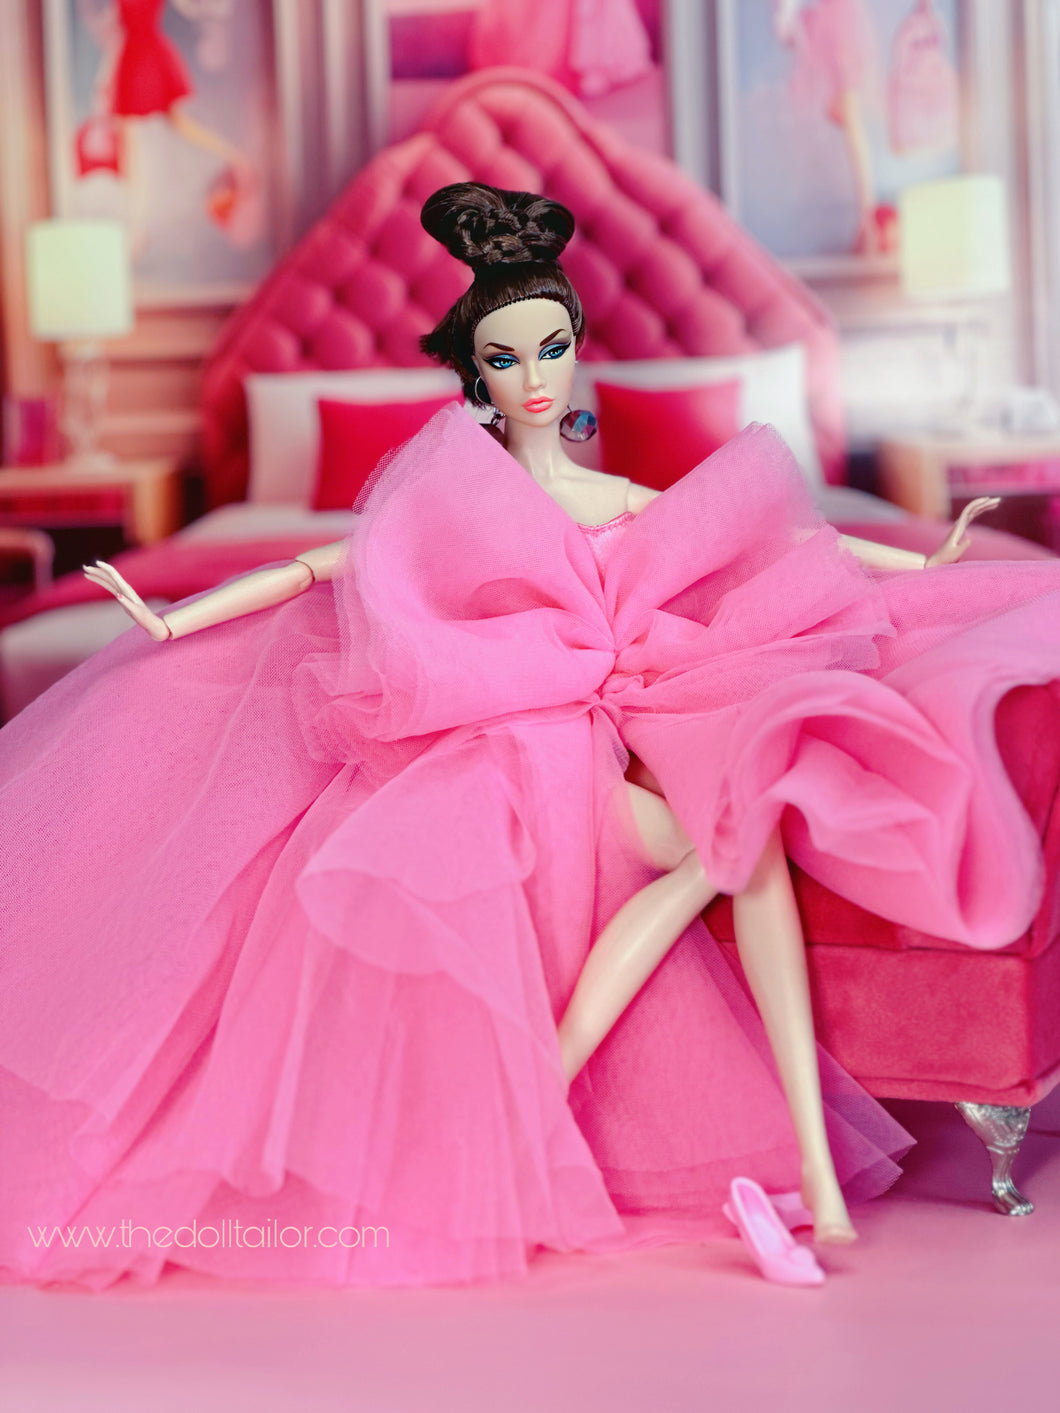 Pink style dress with giant Bow for Barbie doll and IT dolls